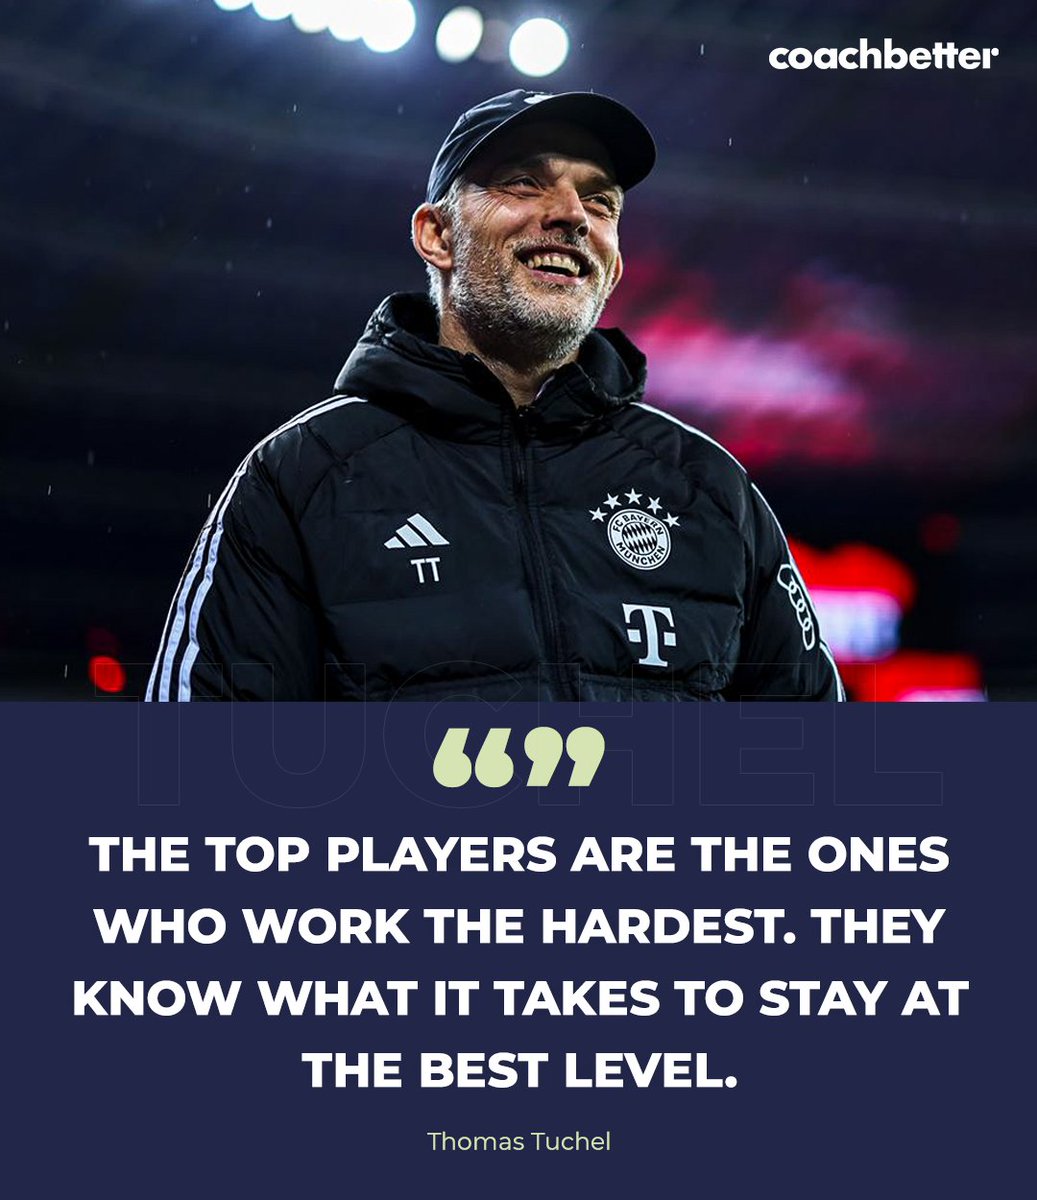 🗣️ “The top players are the ones who work the hardest. They know what it takes to stay at the best level.” - Thomas Tuchel 👏 #coachbetter #tuchel #bayern #ucl